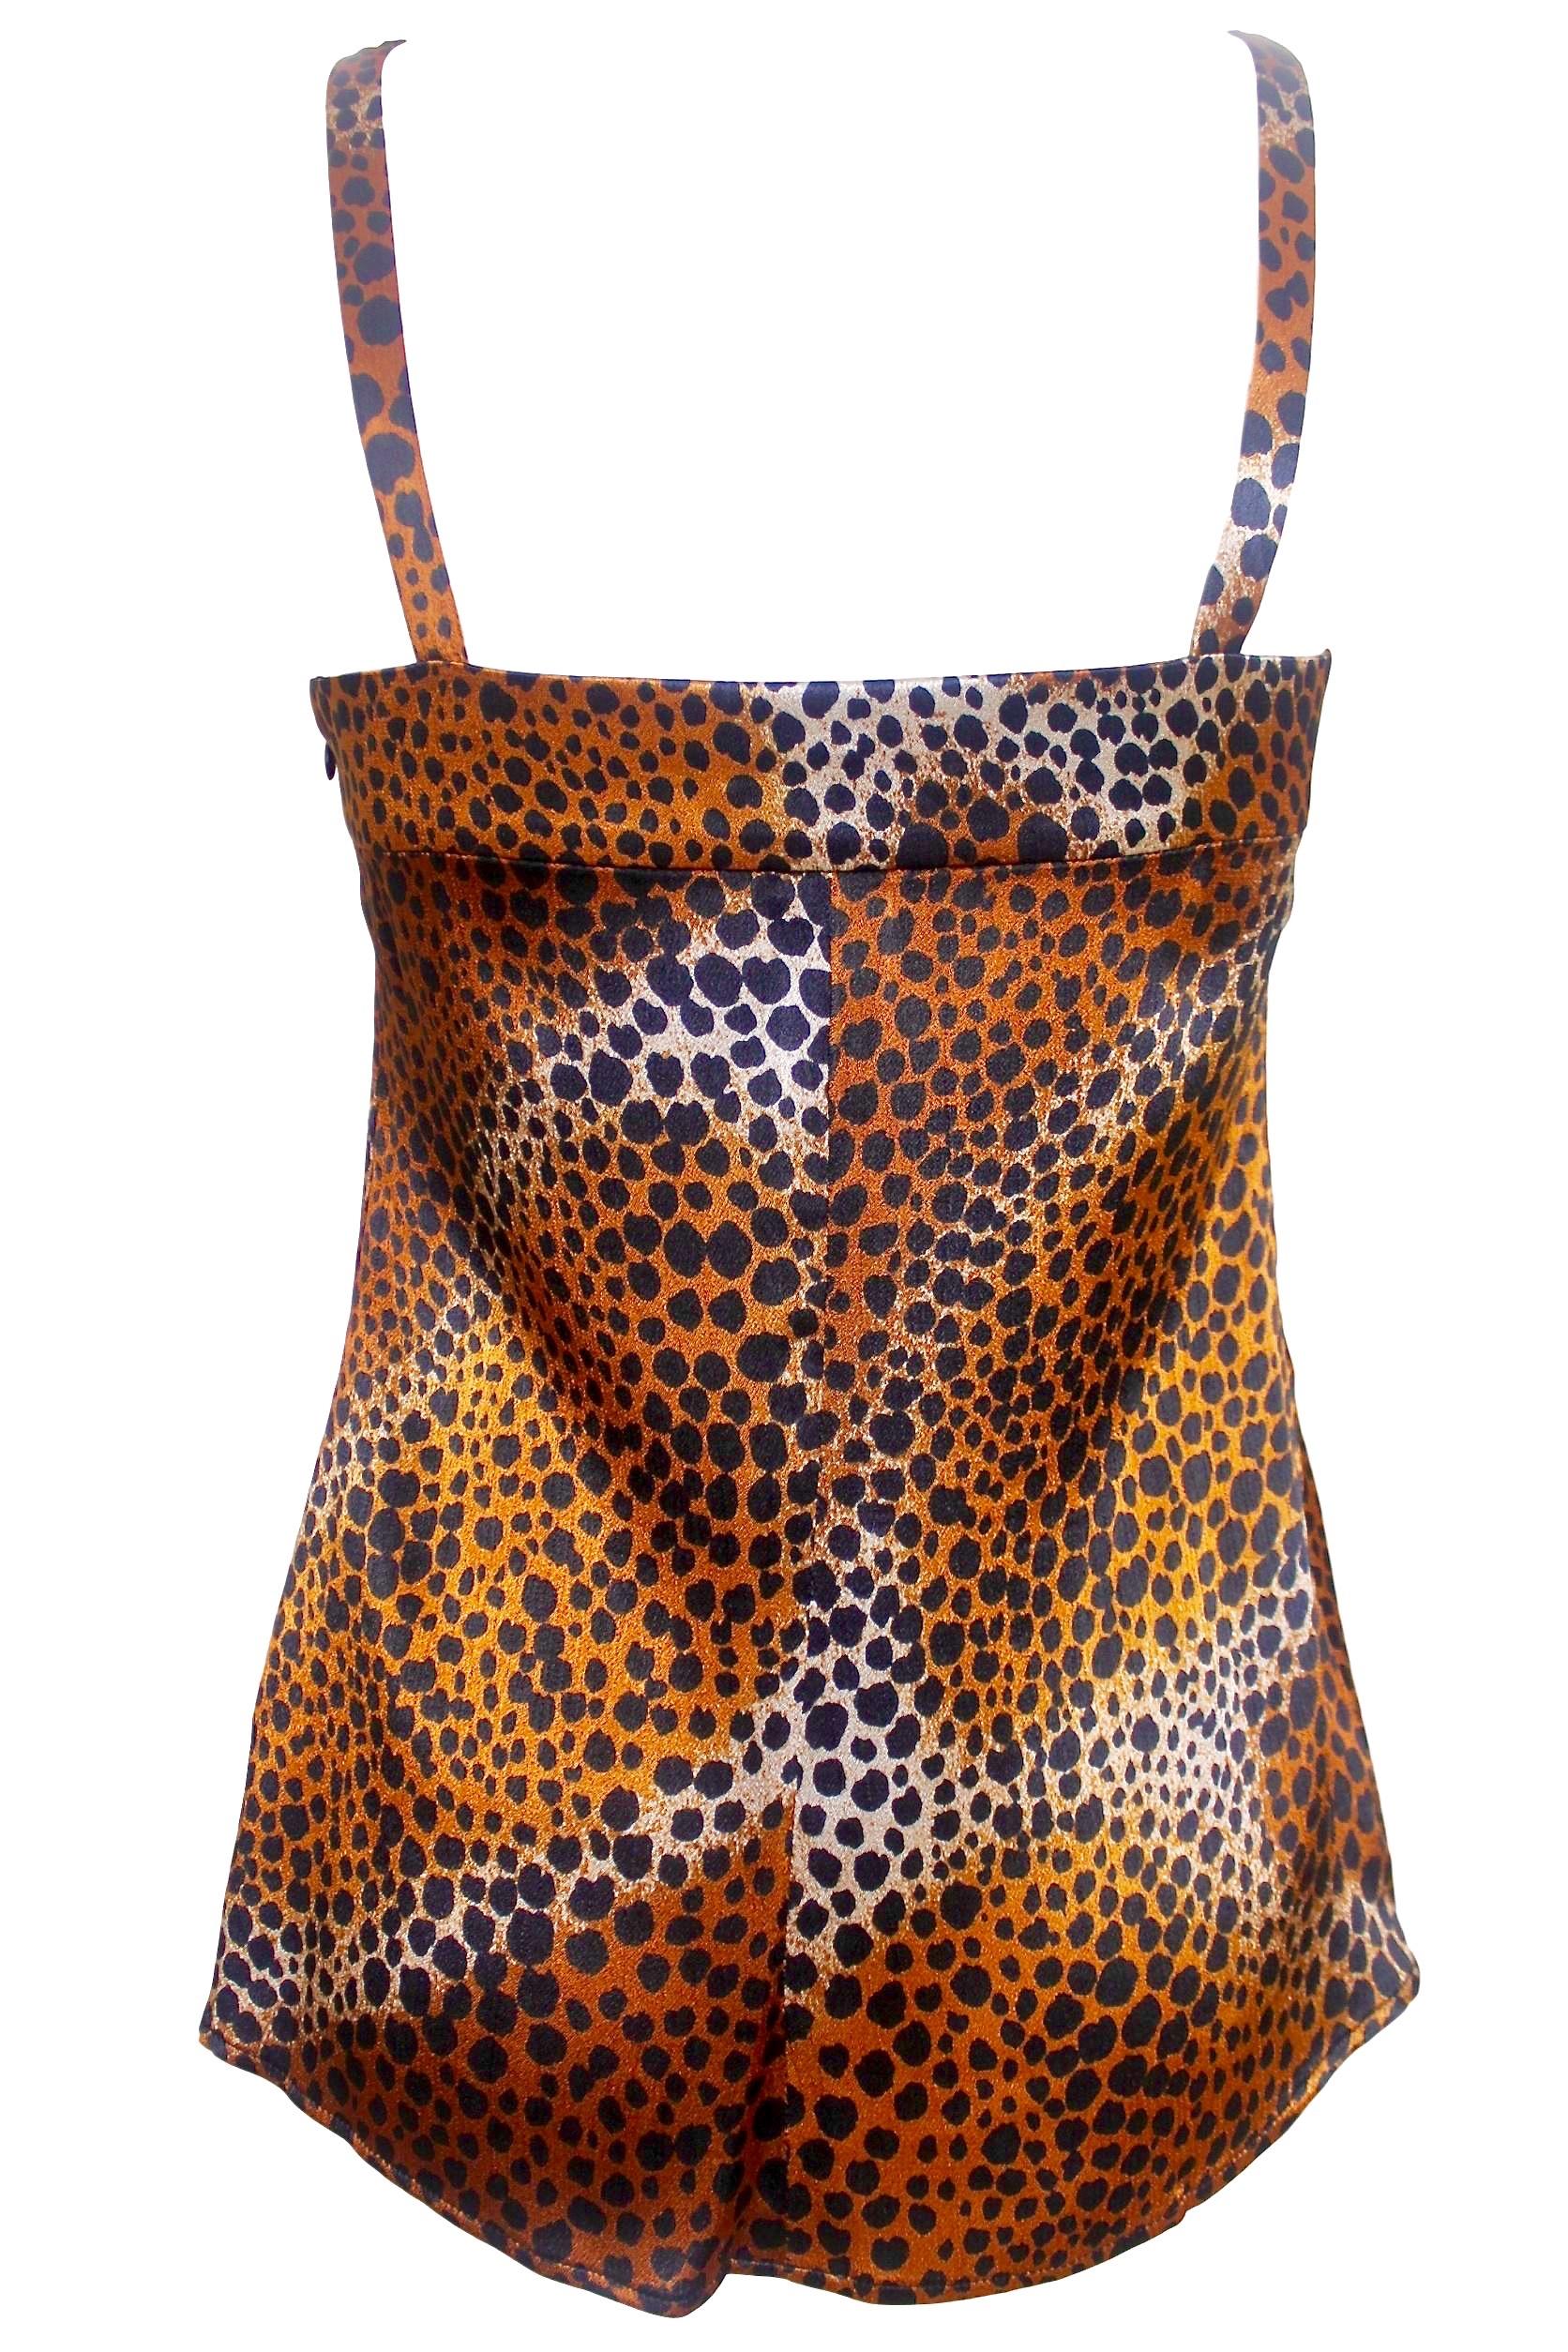 Yves Saint Laurent 1977 Leopard Print Camisole and Trousers For Sale 8